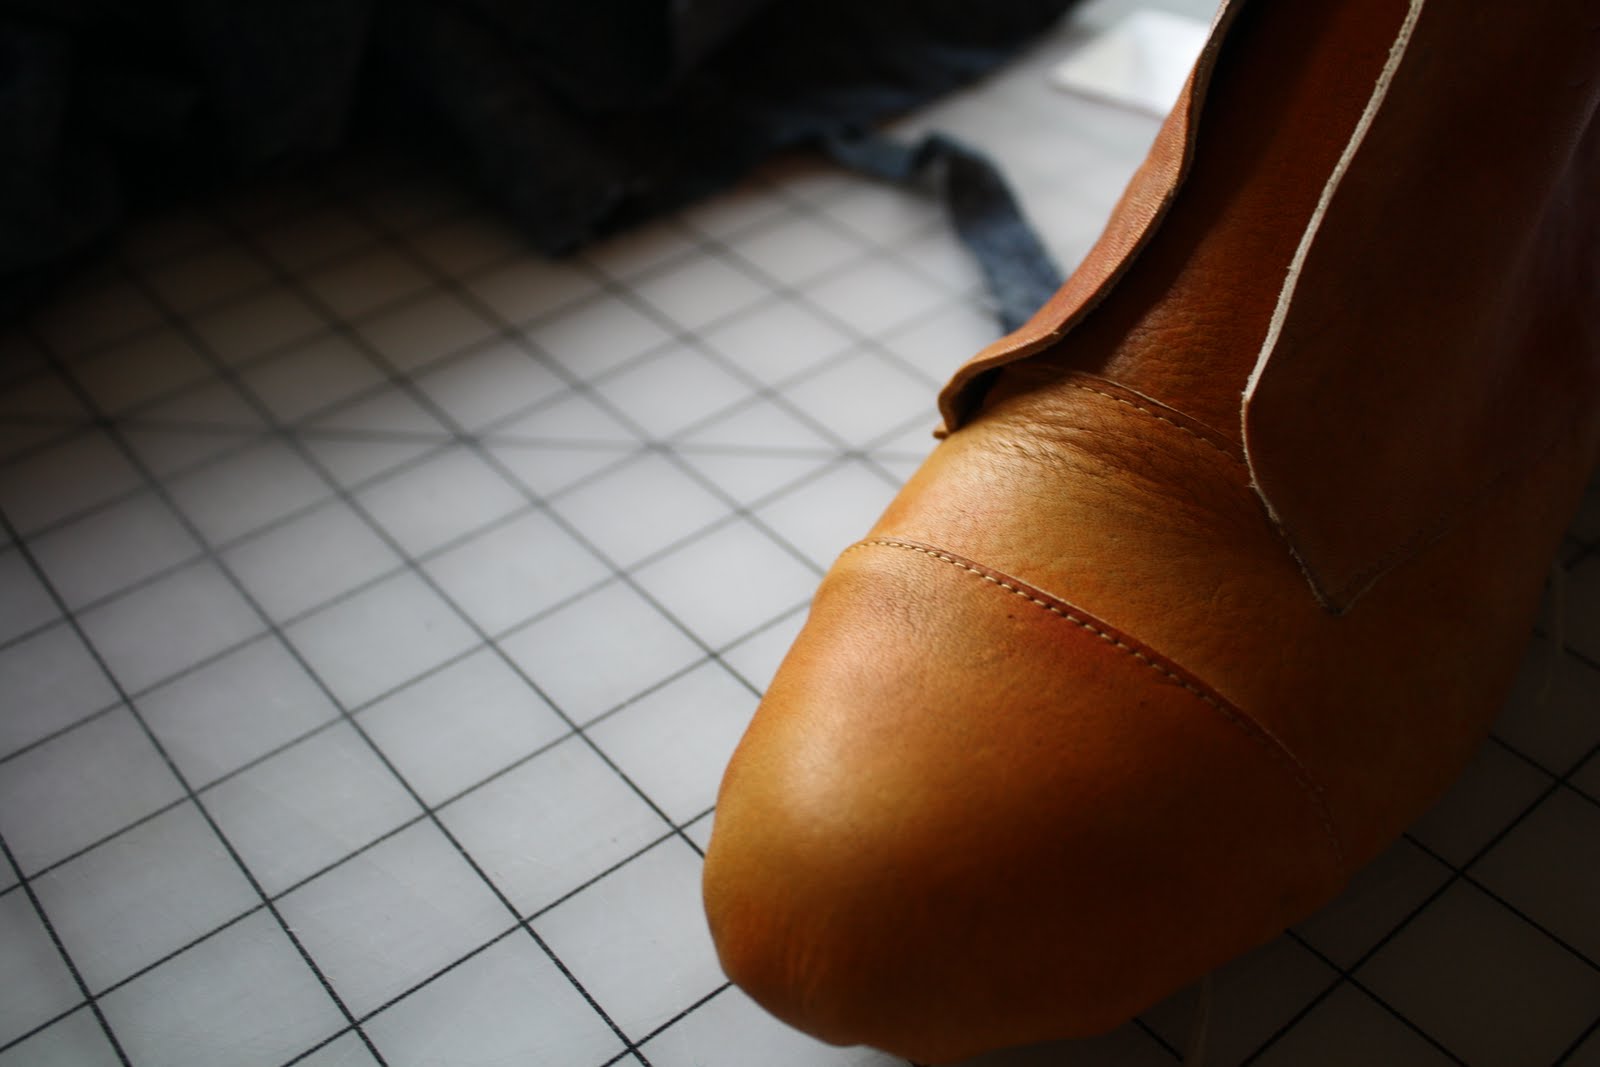 First attempt: Shoemaking